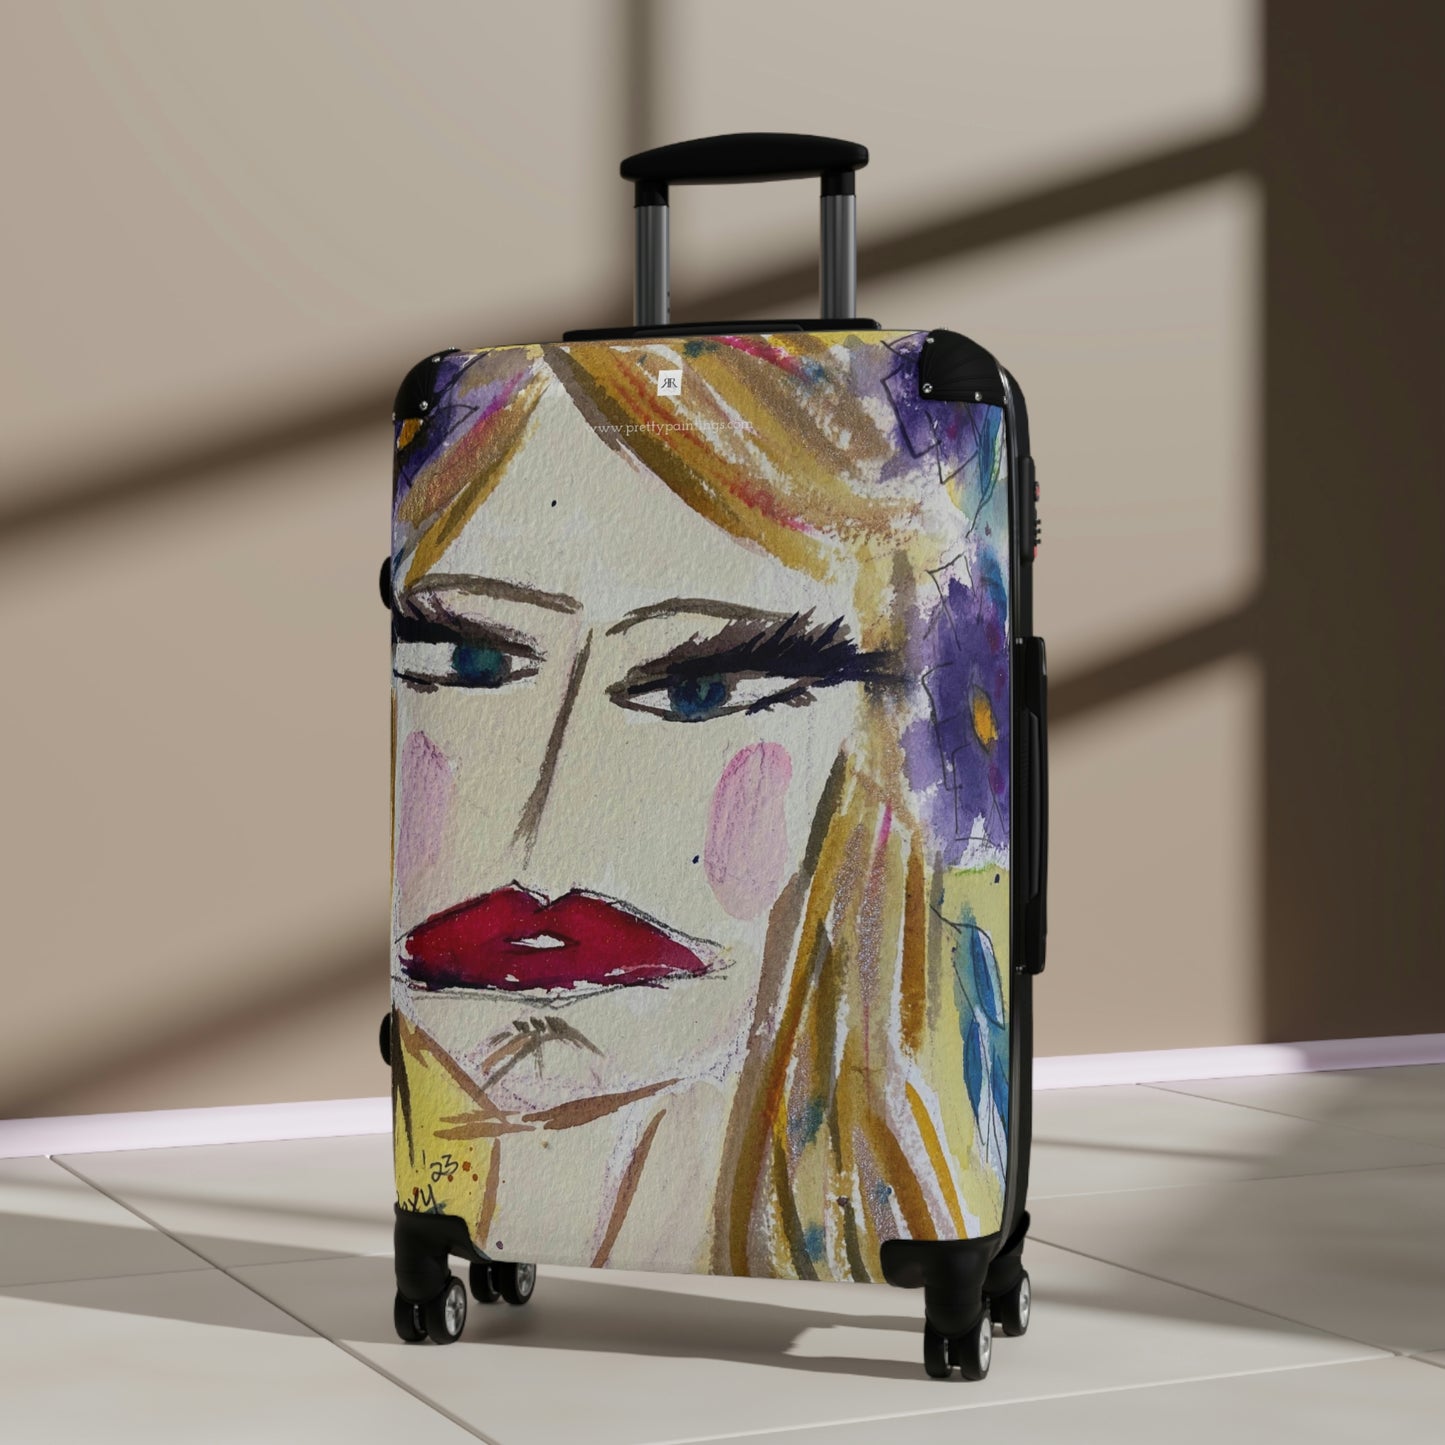 Moody Blonde "Whateverr!" Carry on Suitcase